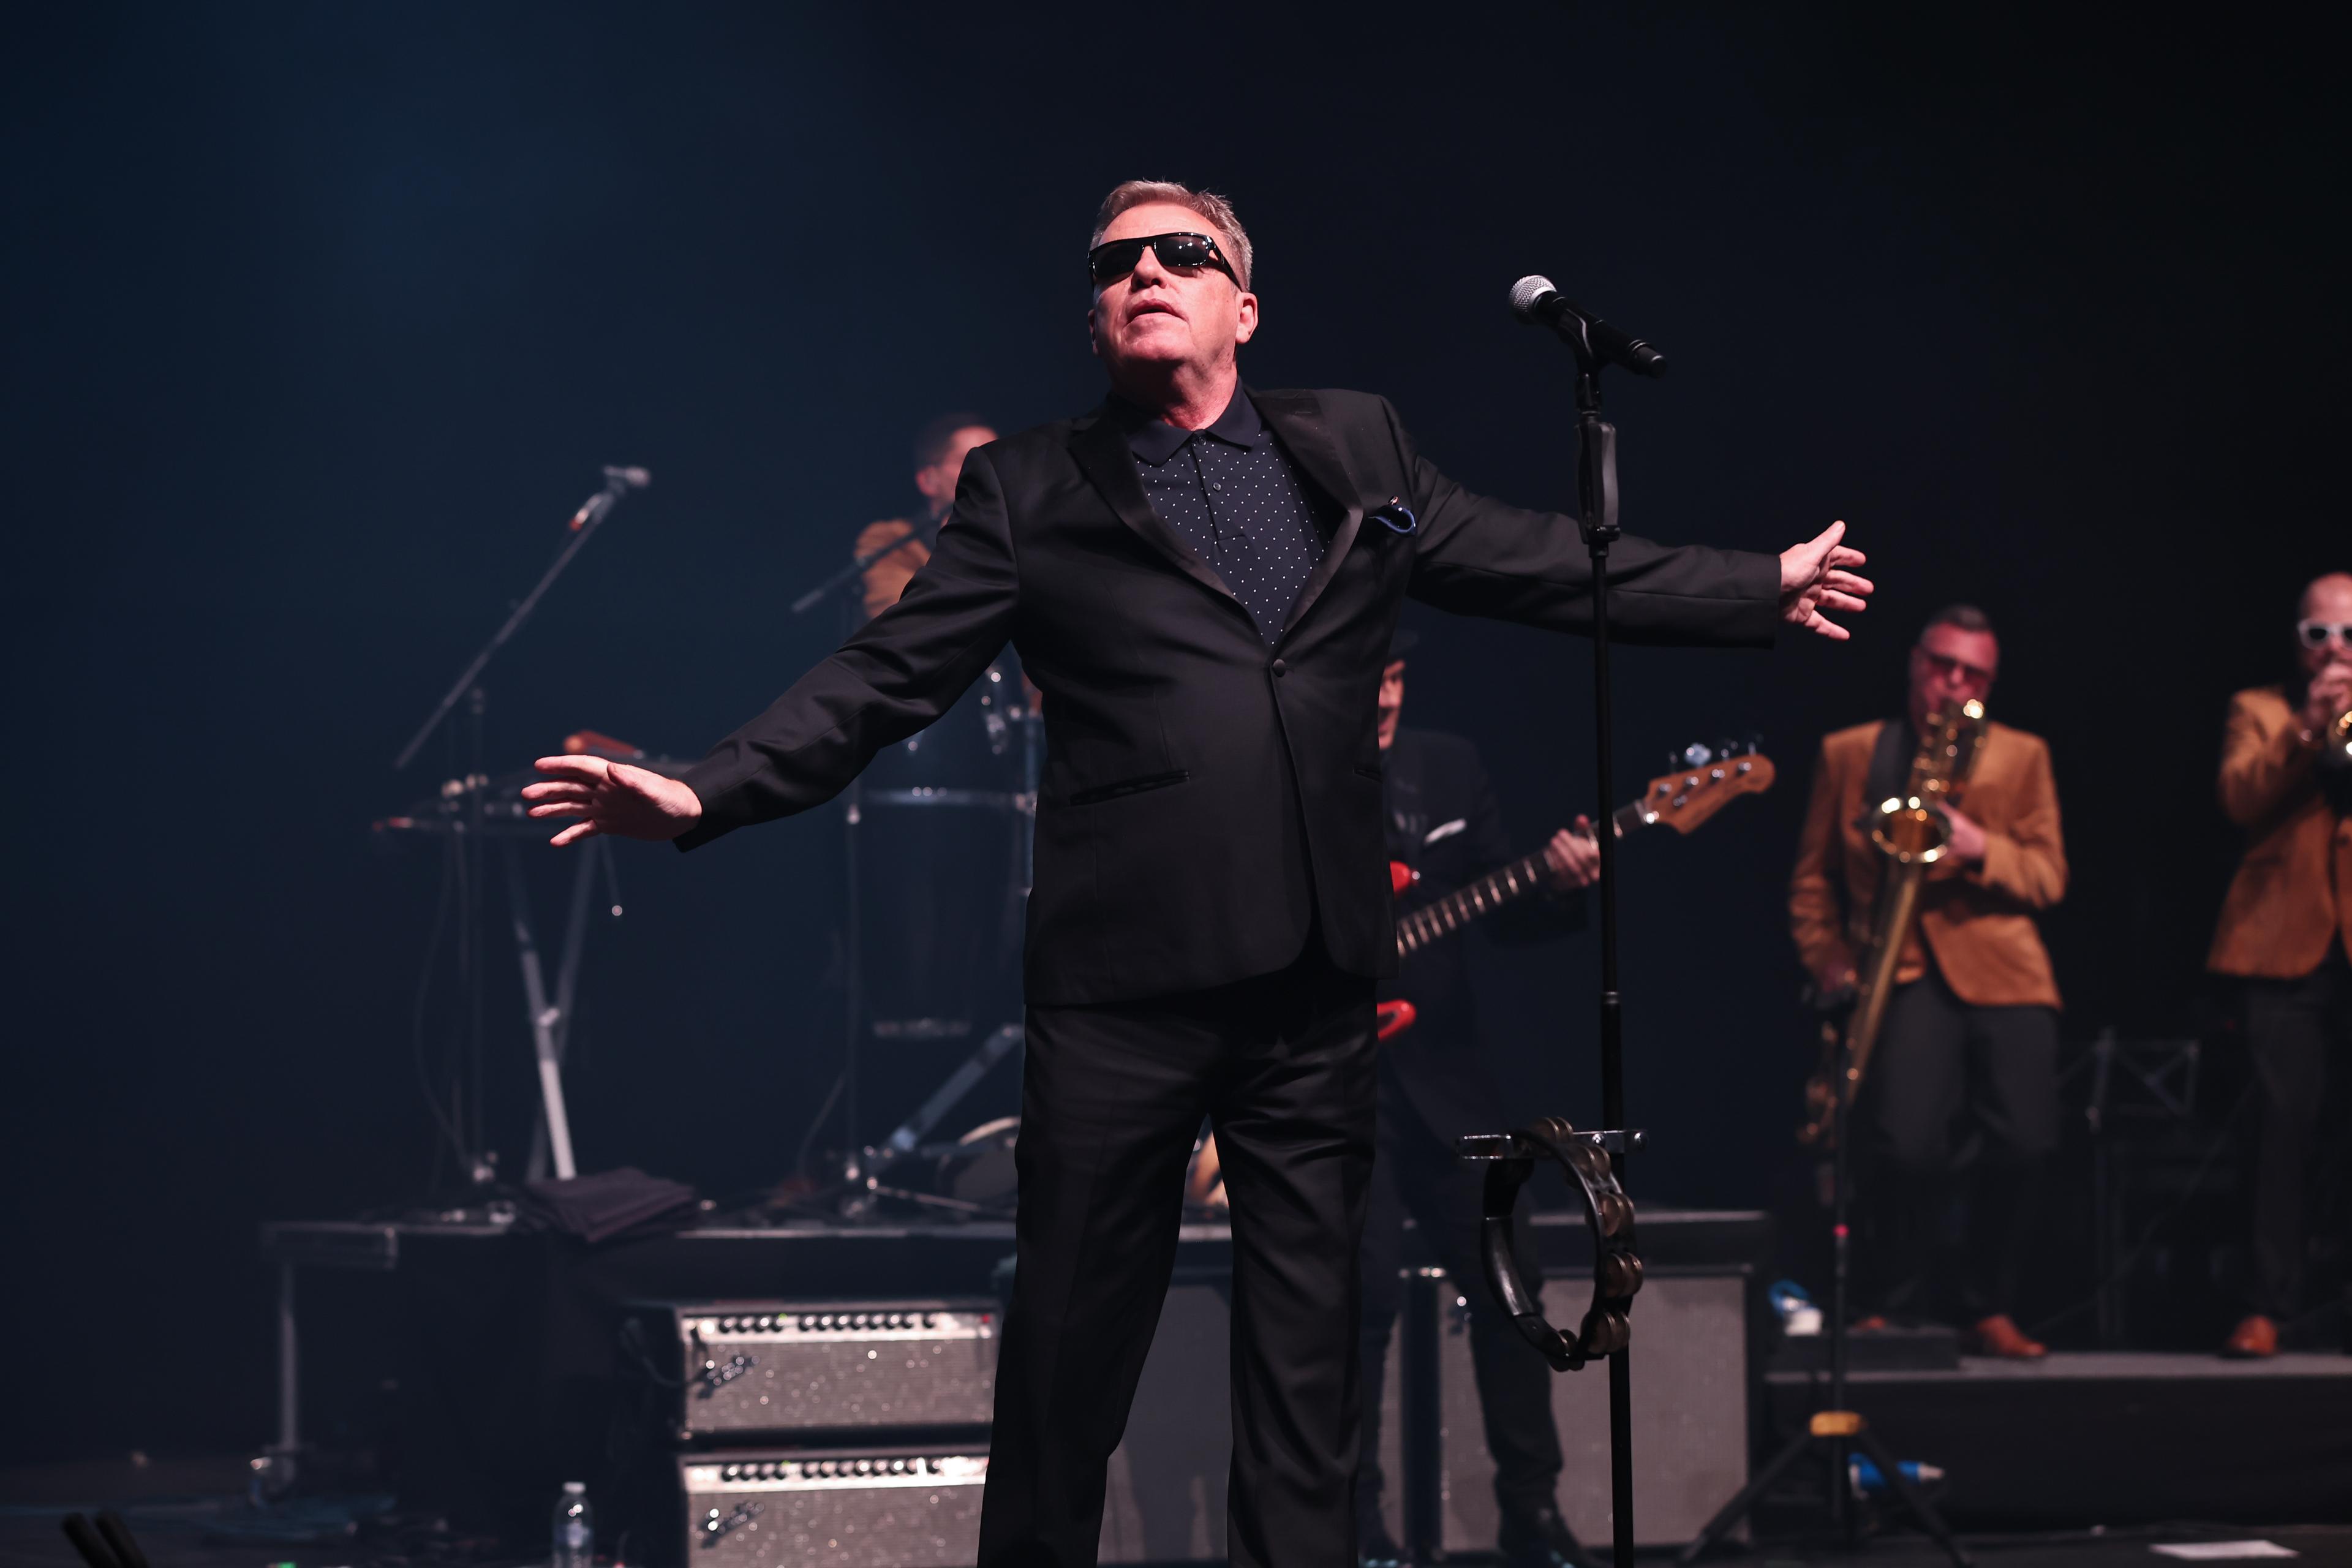 Madness perform at the Sir Peter Blake gig in London. Photo Credit: Sharon Latham